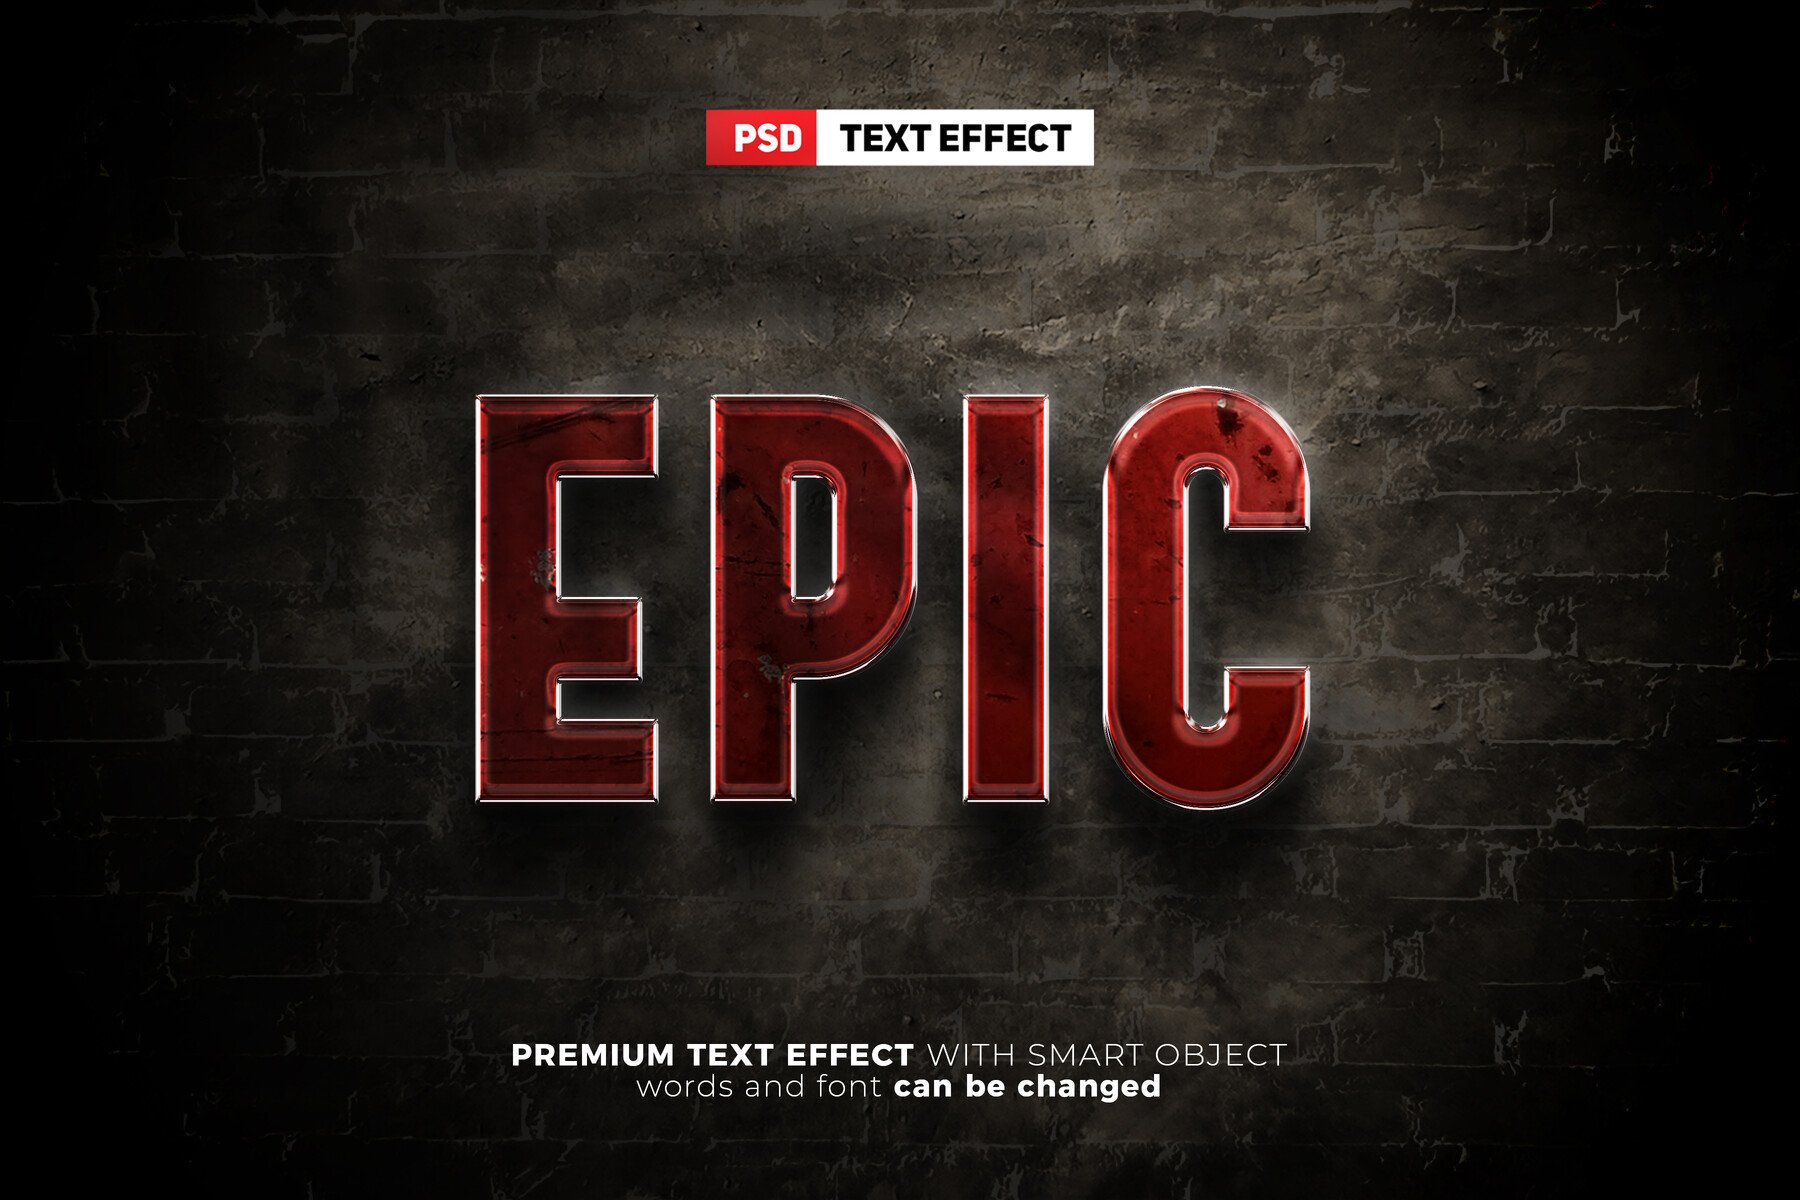 ArtStation - 3D Epic. PSD fully editable text effect. Layer style